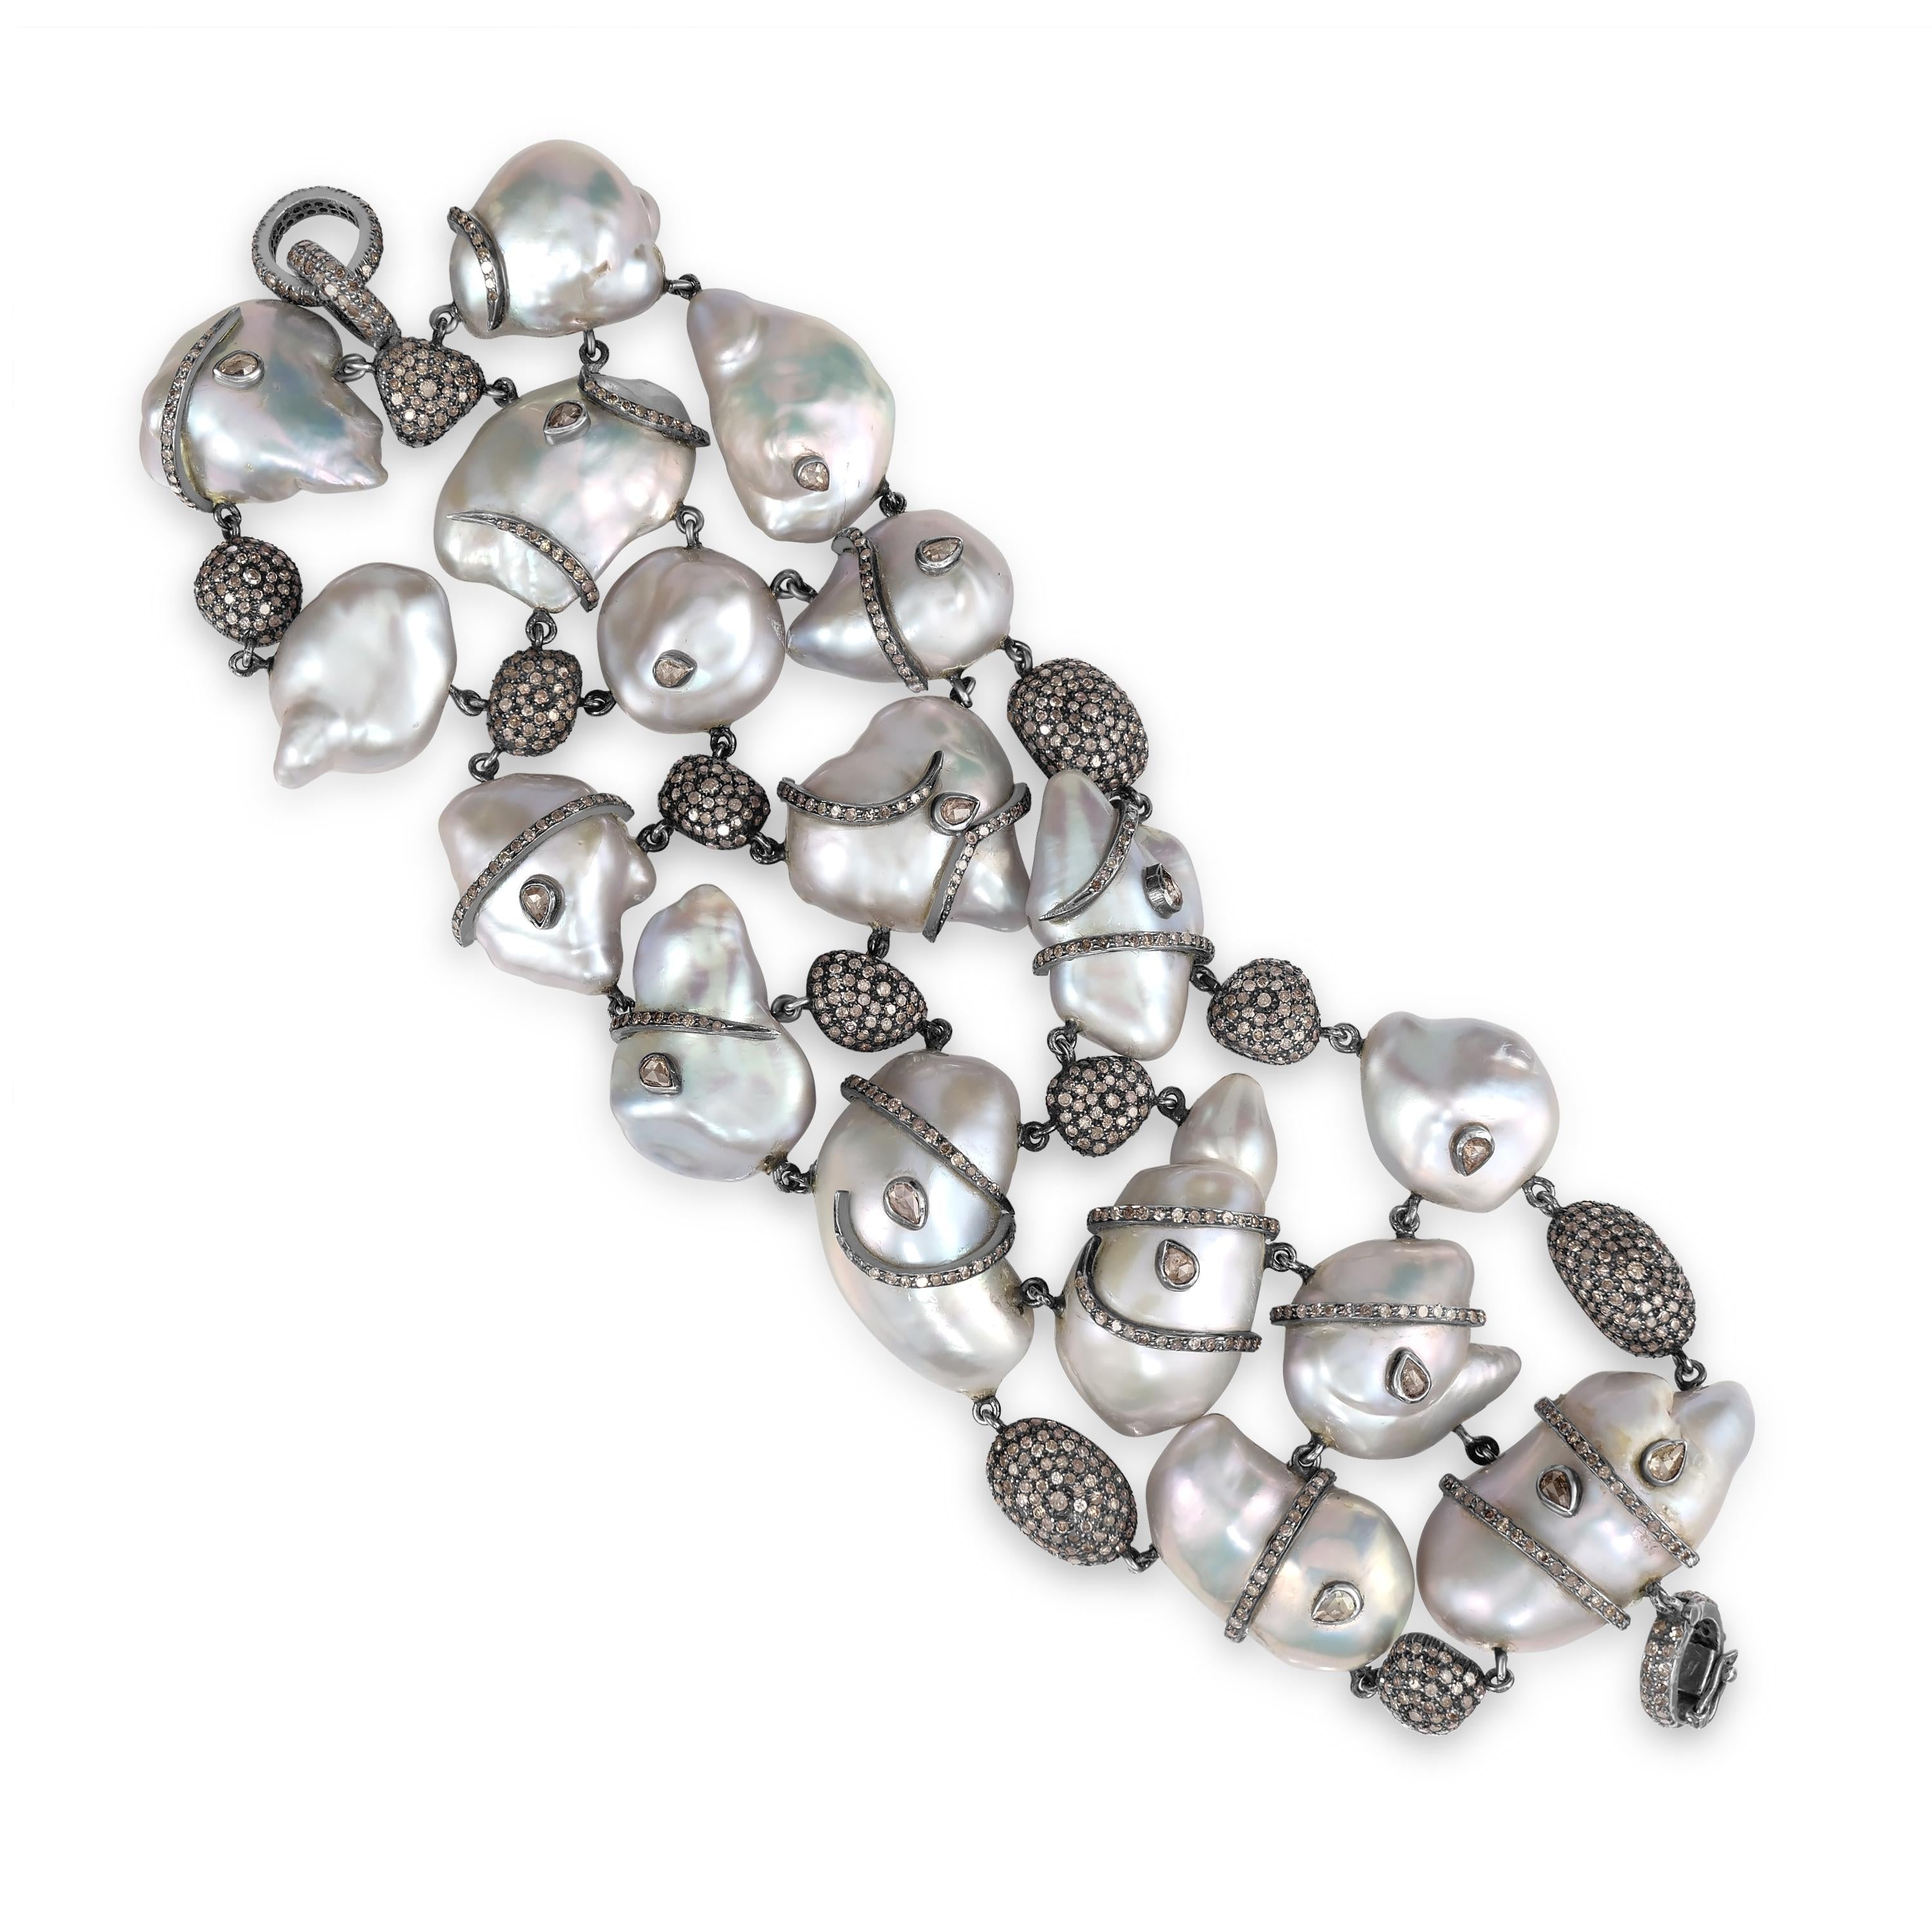 Introducing our exquisite Victorian Pearl and Diamond Beaded Bracelet, a luxurious piece that exudes elegance and sophistication.

Crafted with meticulous attention to detail, this stunning bracelet features heart-shaped pearls delicately wrapped in